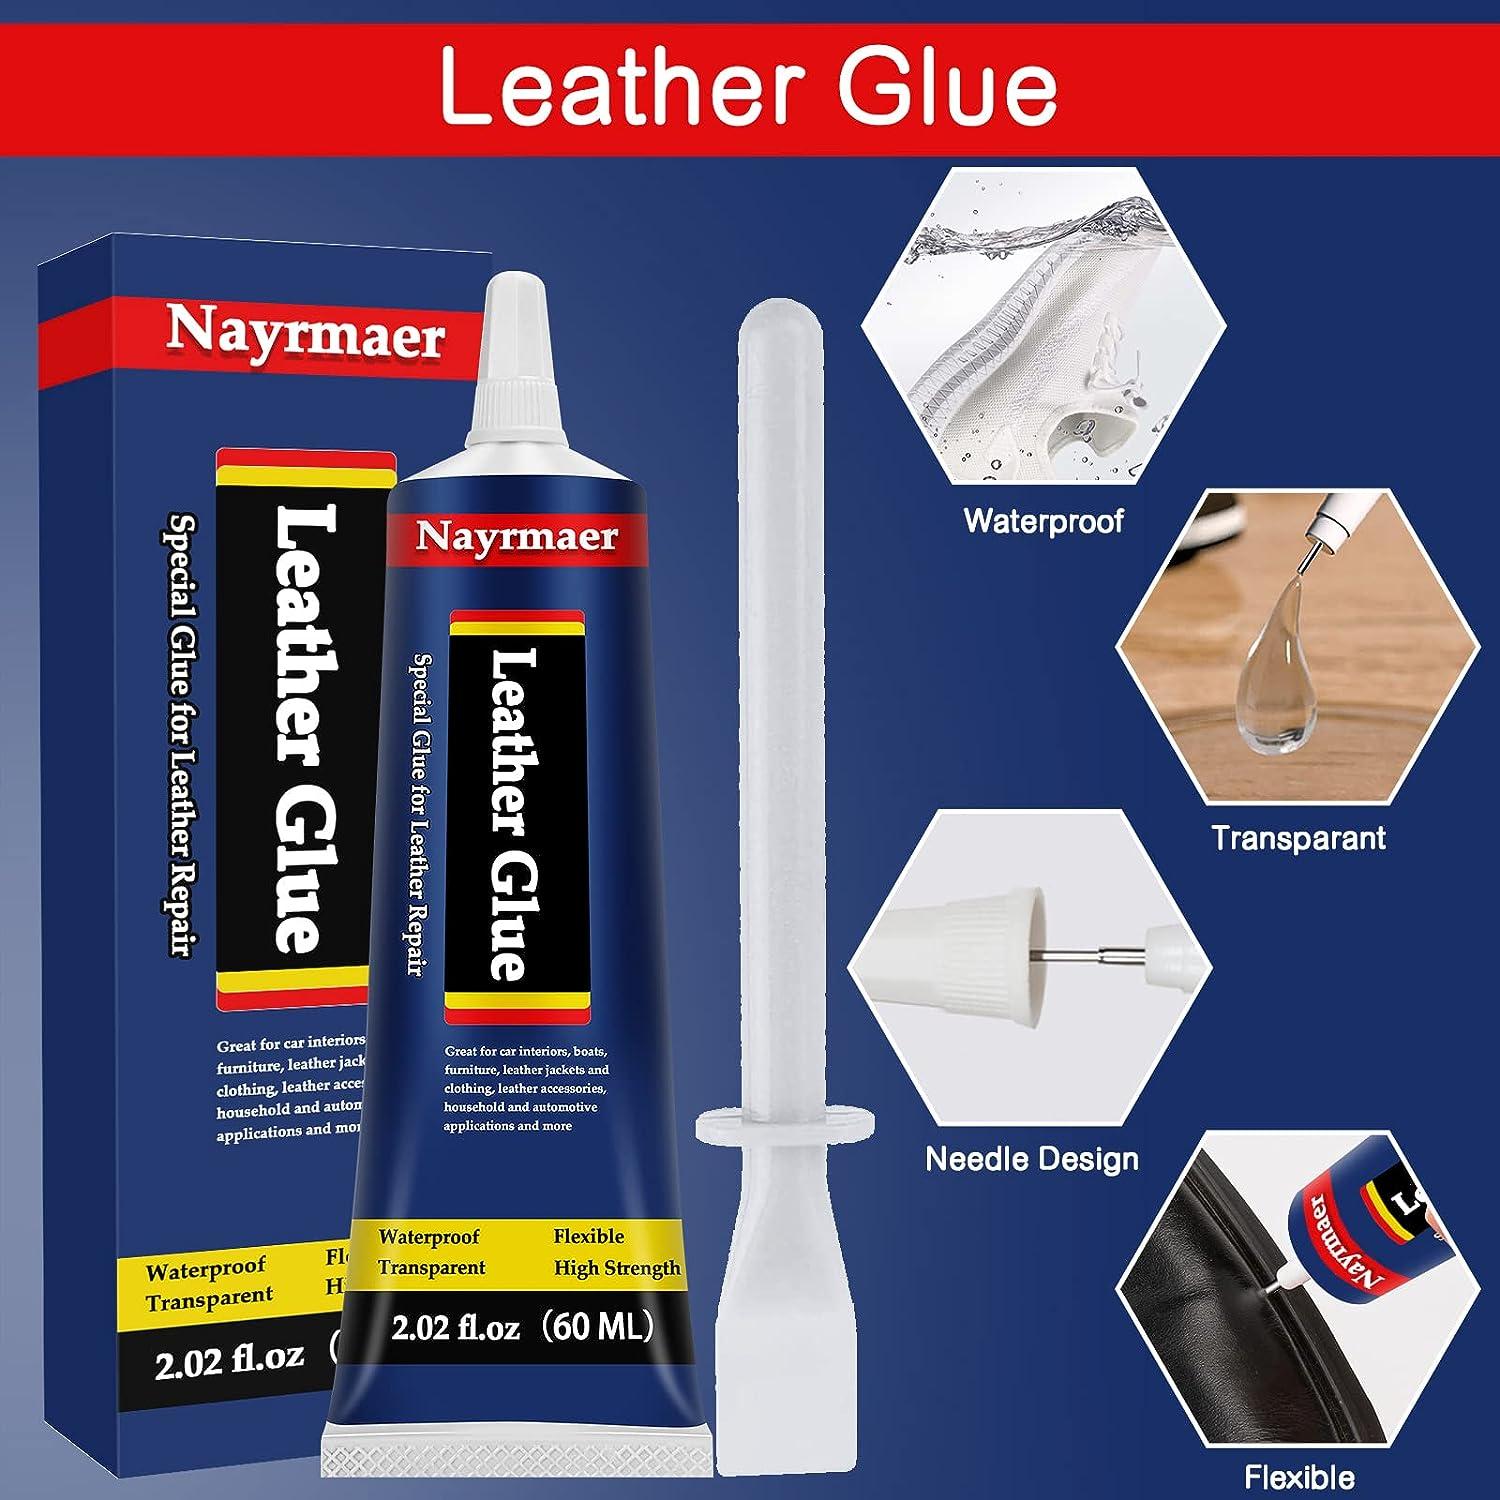 Holika 20g Special Glue for Leather, Leather Repair Glue, used for Bonding Between Leather and Leather, Leather and Substrates of Different Materials